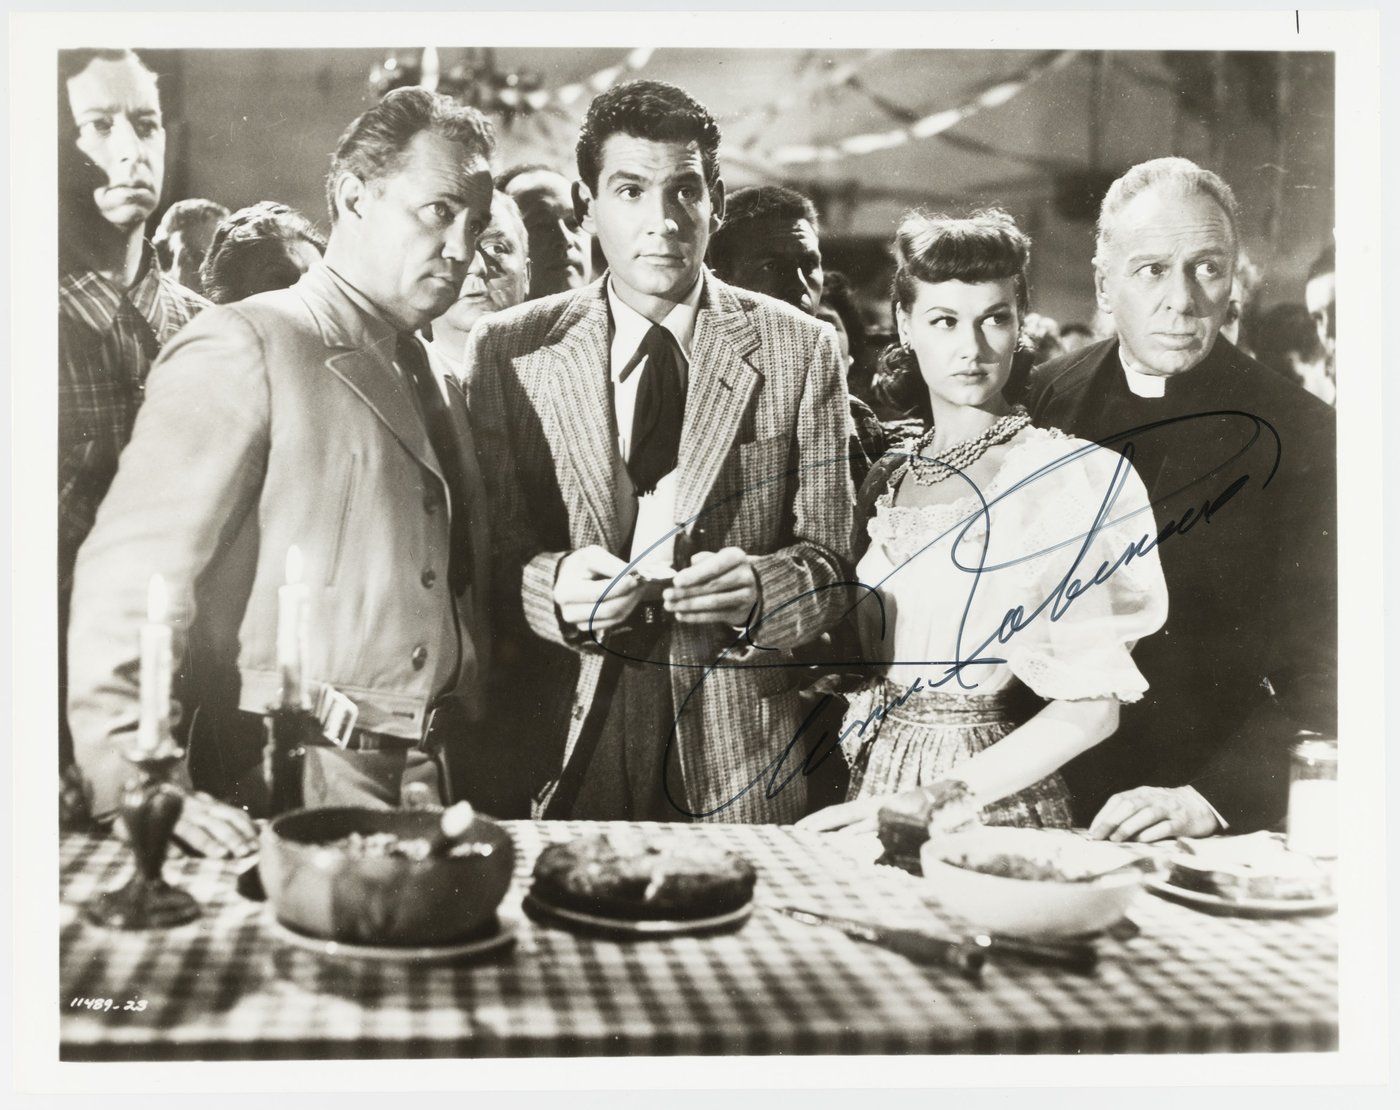 Hake's - WAR OF THE WORLDS (1953) - ANNE ROBINSON SIGNED PHOTO.